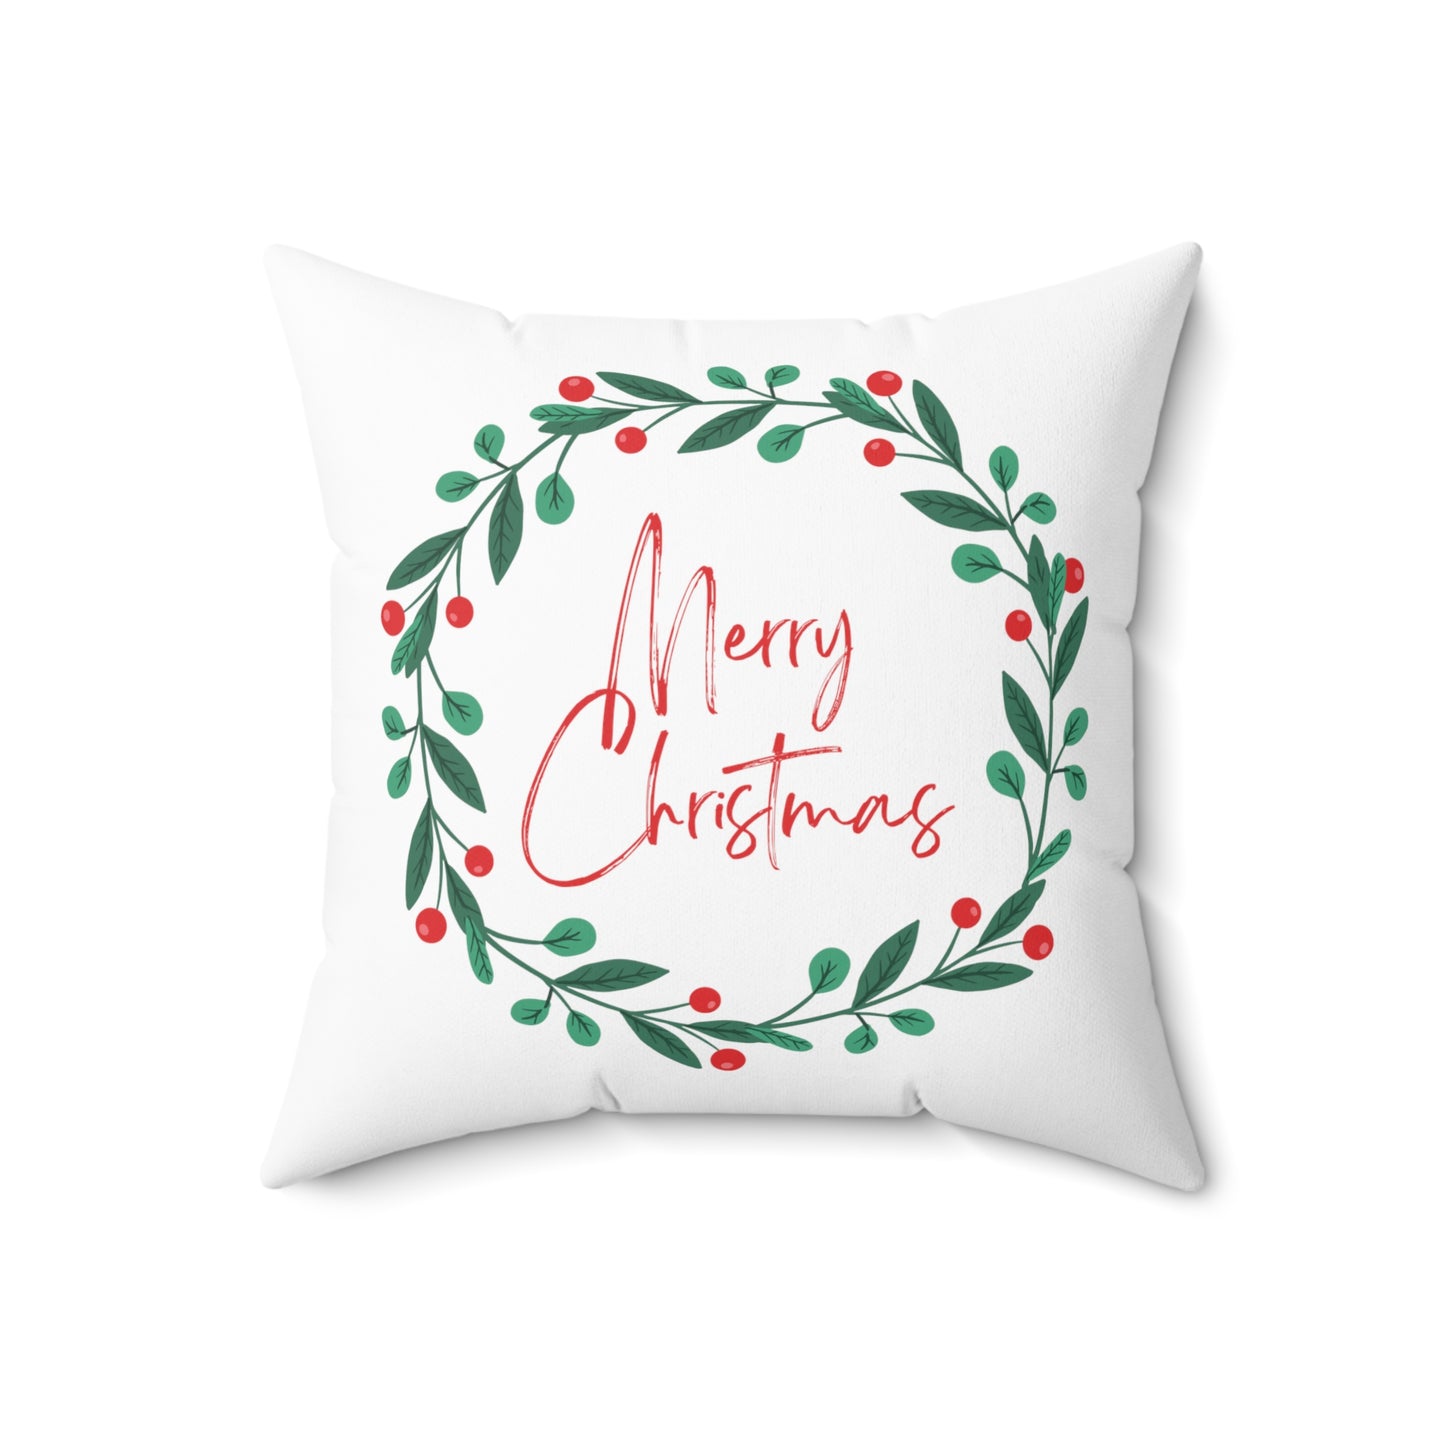 Merry Christmas Printed Polyester Square Pillow, White